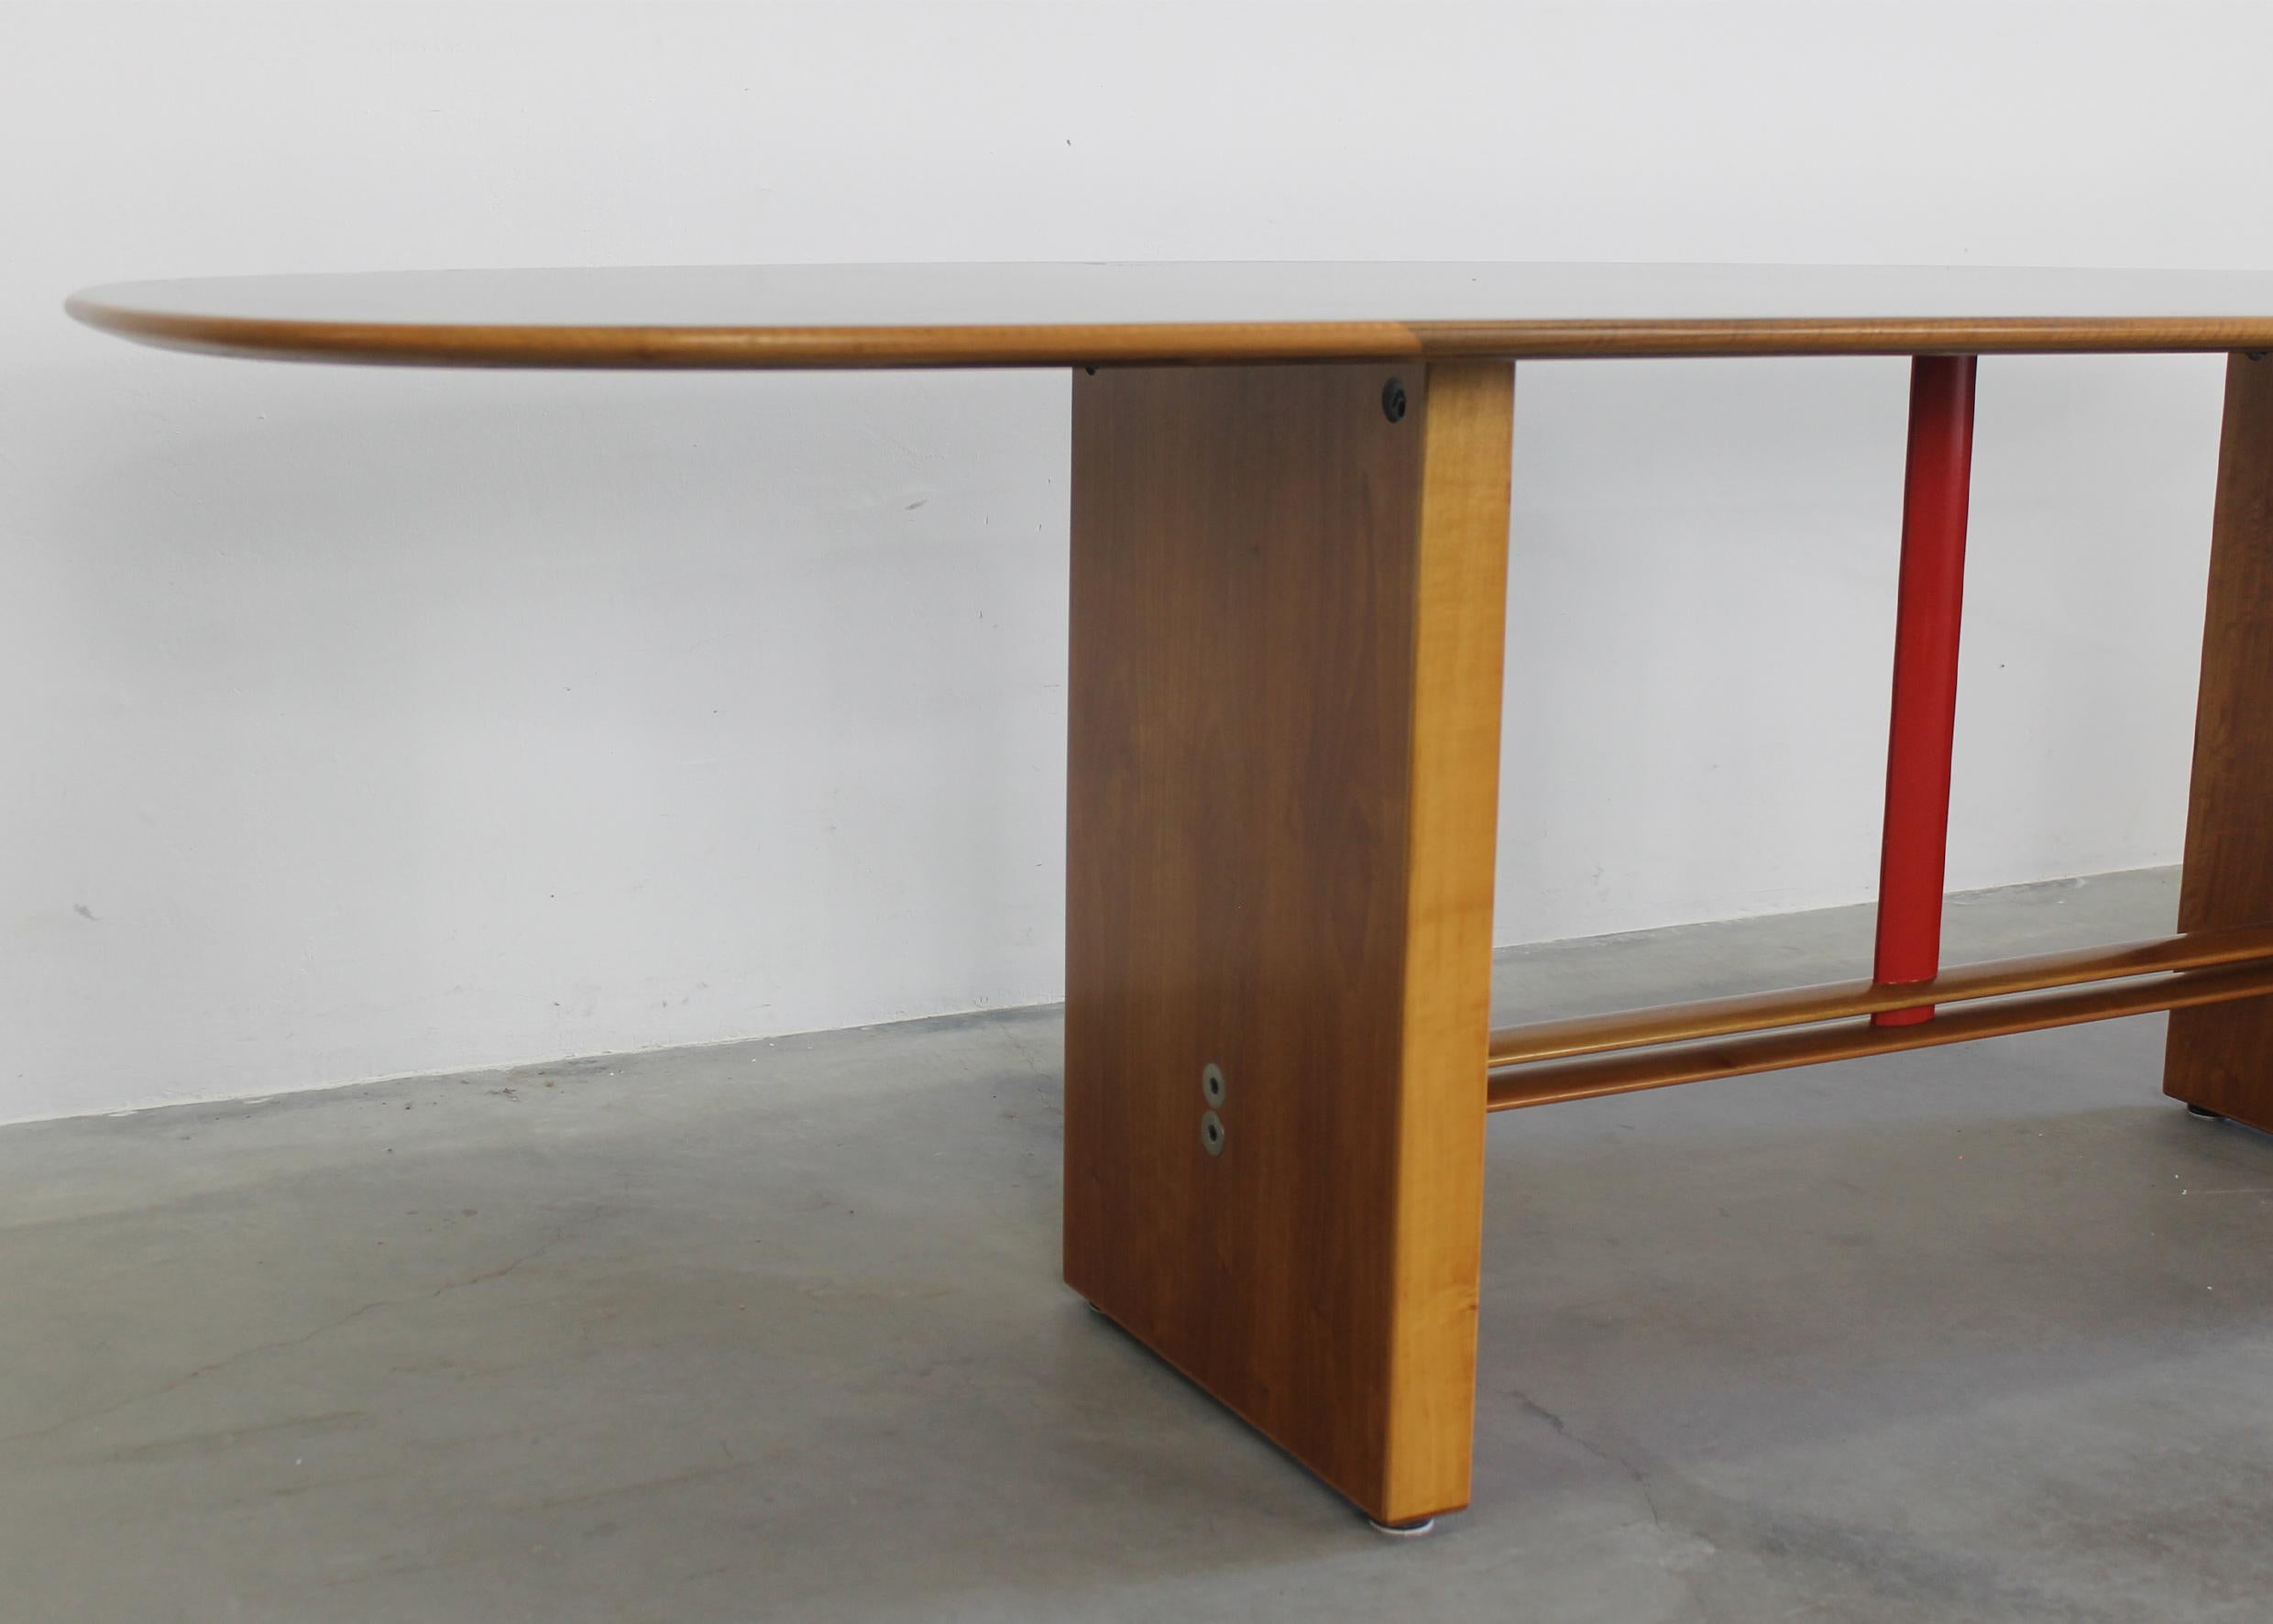 Mid-20th Century Tobia & Afra Scarpa Torcello Table in Walnut Wood by Stildomus 1970s For Sale